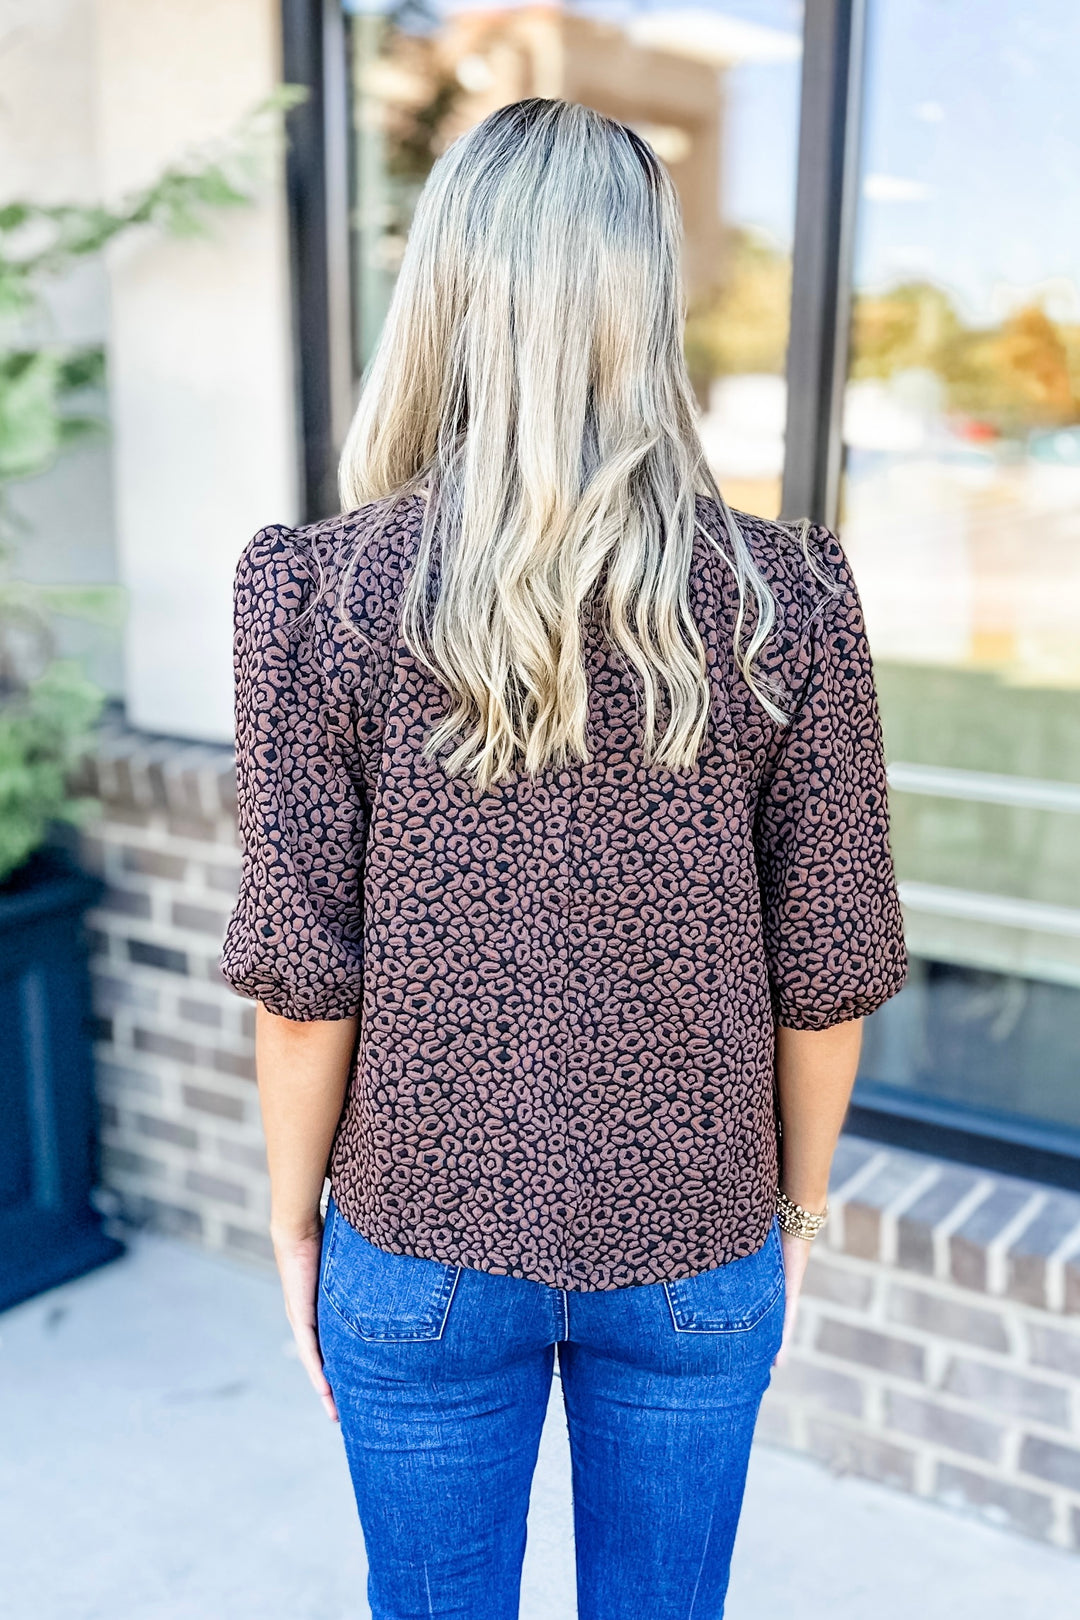 BROWN & BLACK LEOPARD SPOTTED TOP